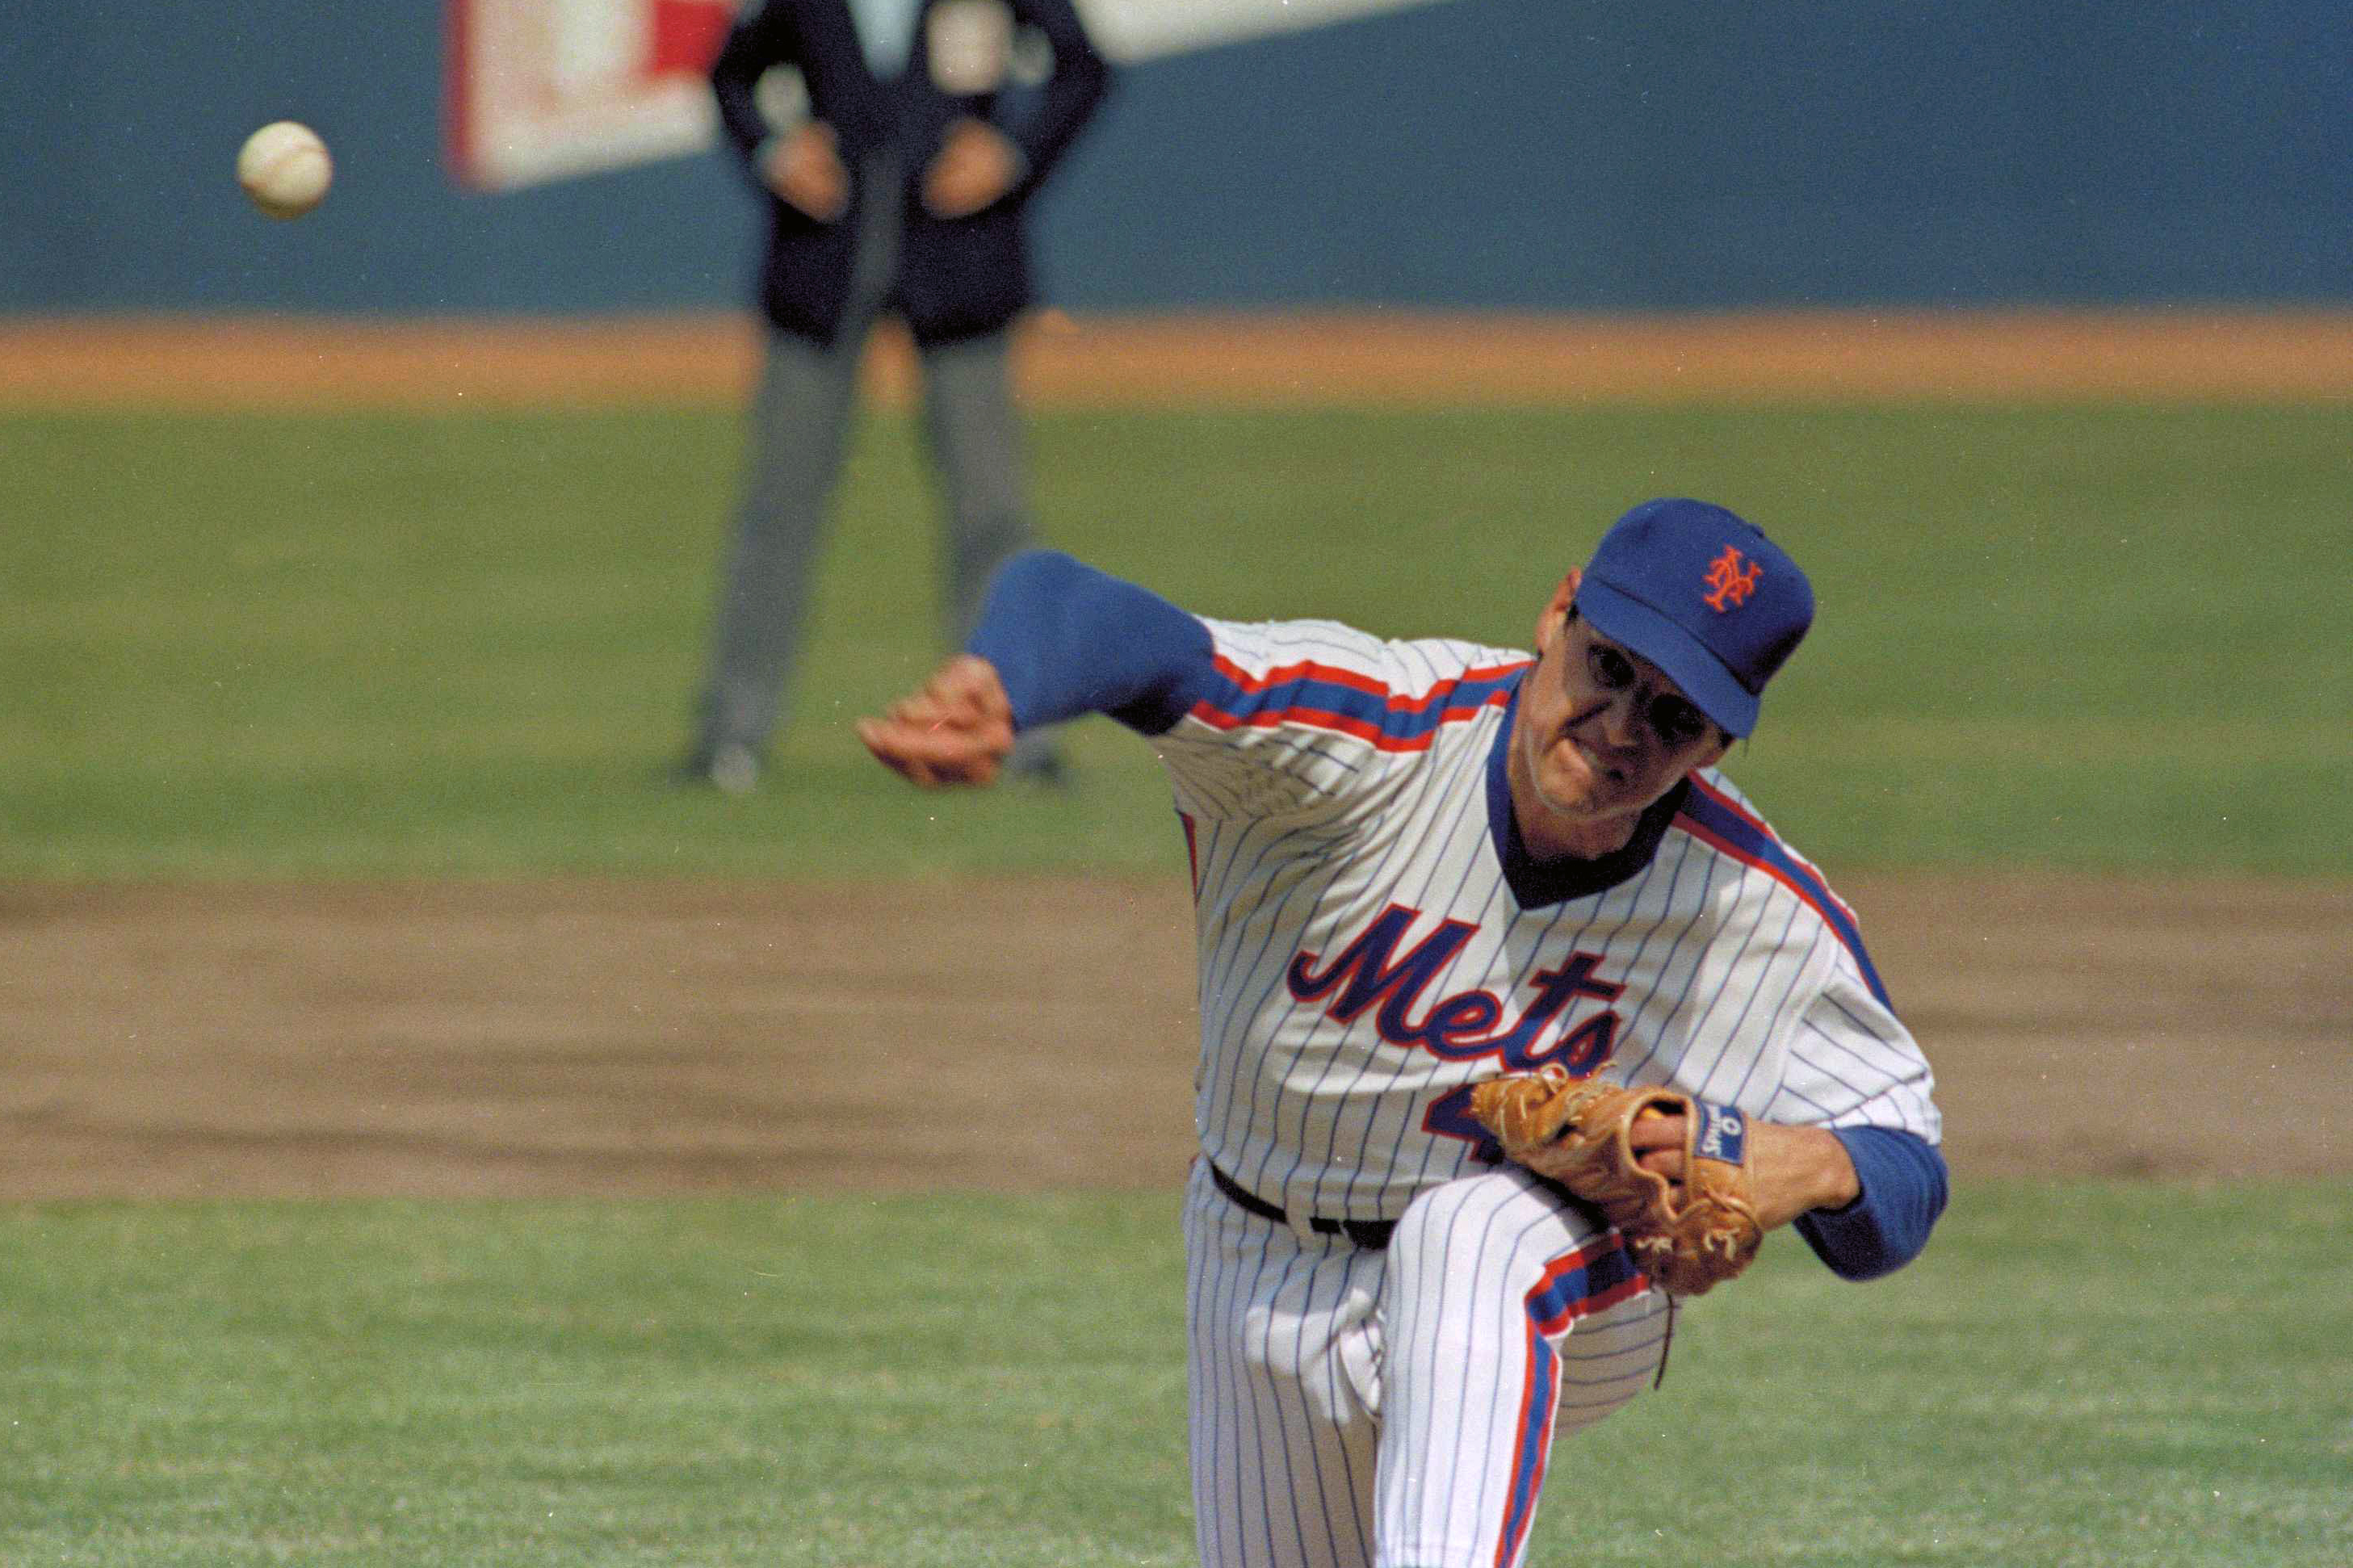 Tom Seaver, Mets pitching great, who got 300th win with White Sox